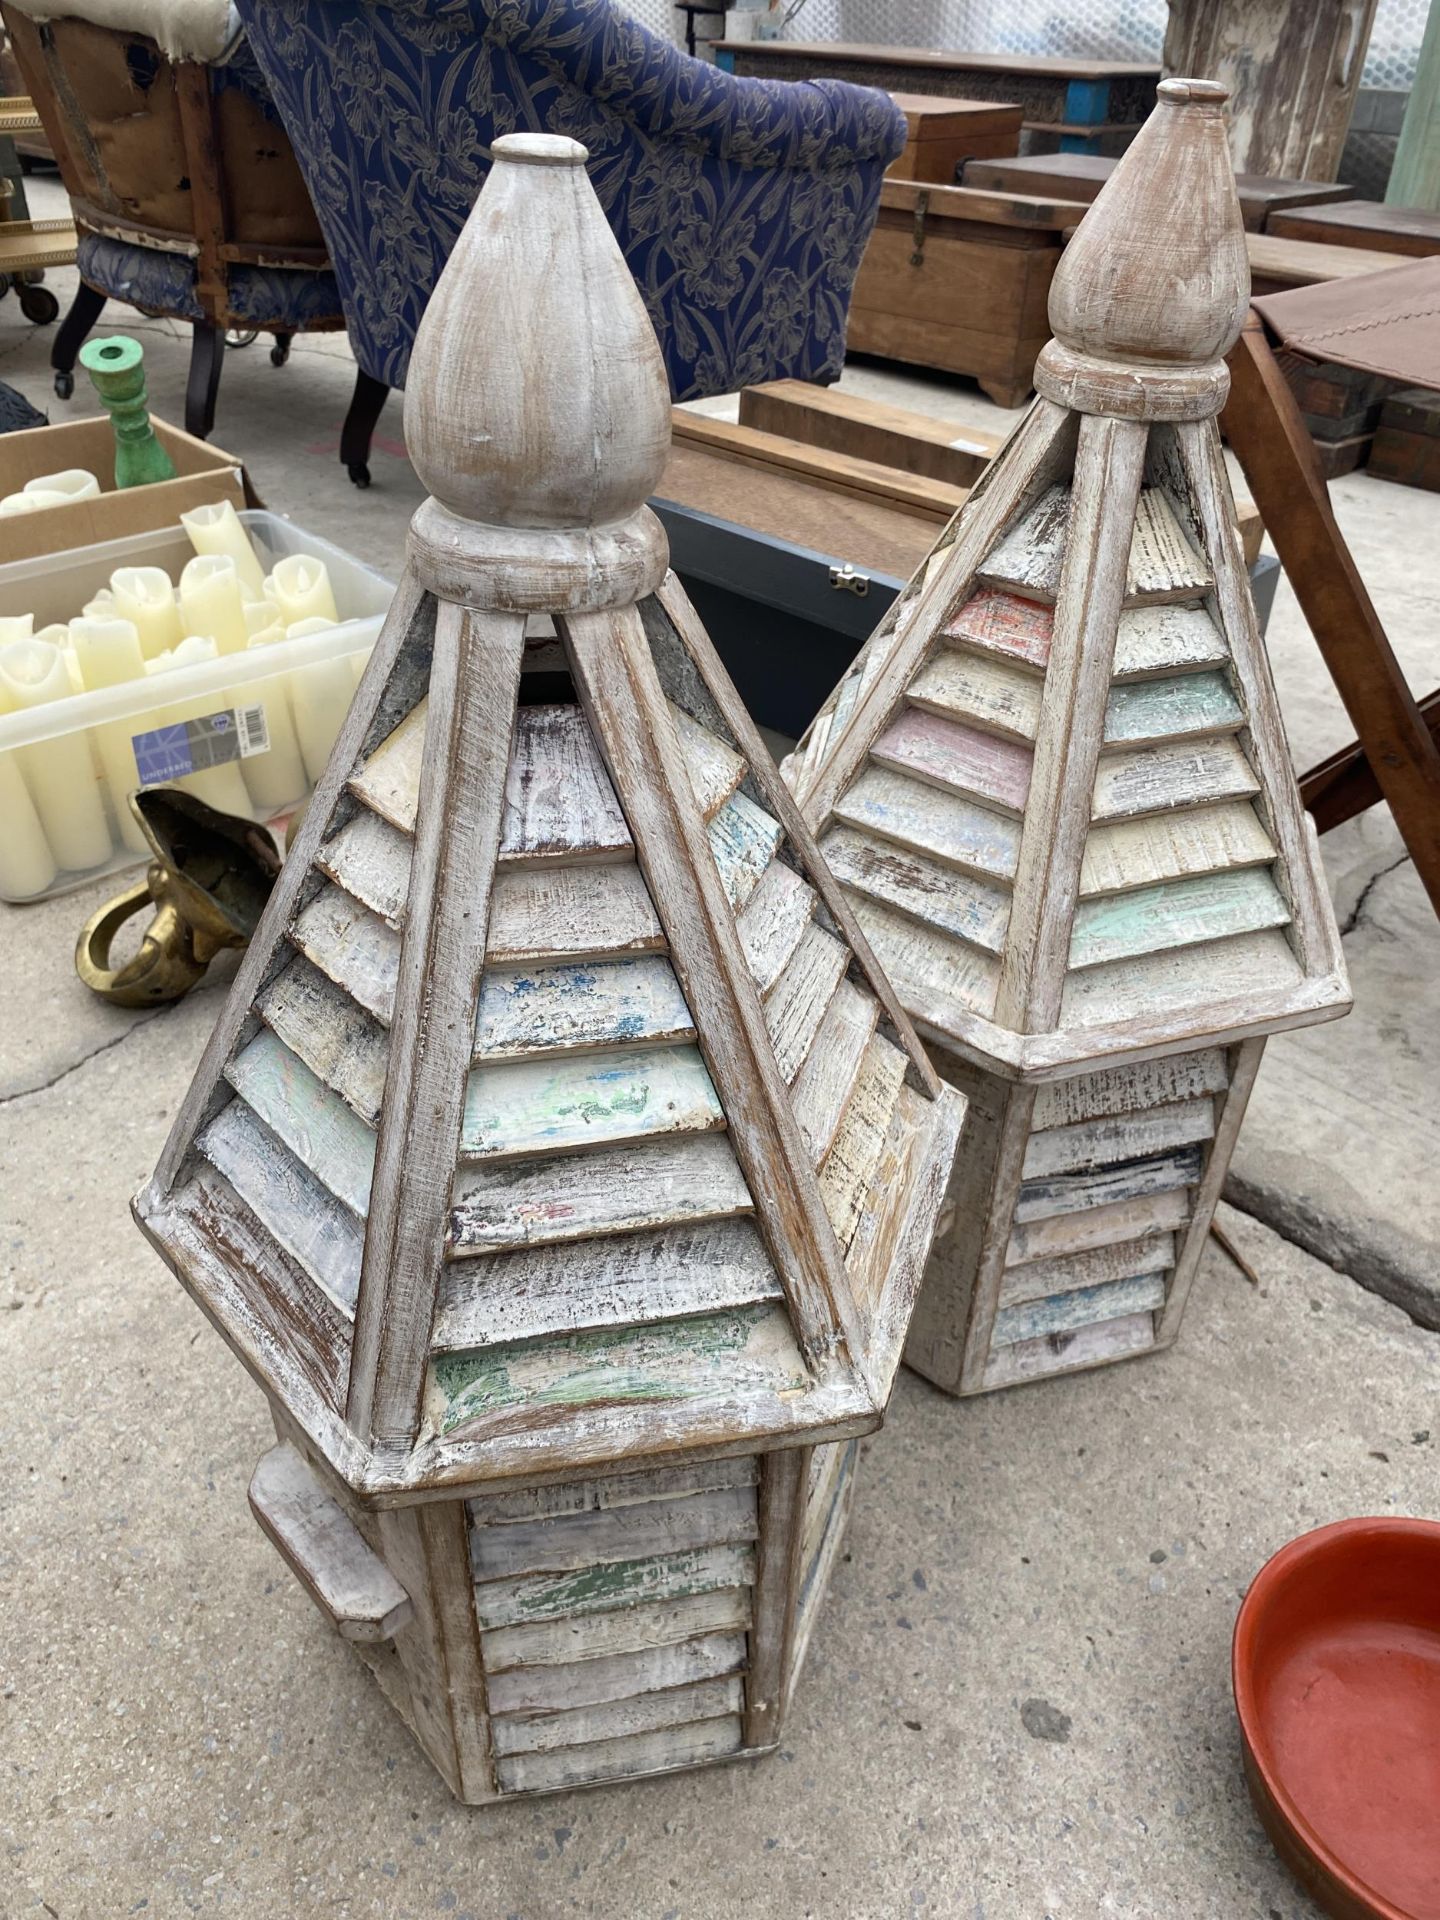 TWO VINTAGE STYLE WOODEN BIRD HOUSES (BOTH AS NEW IN BOXES) (PHOTO SHOWS UNBOXED EXAMPLES)